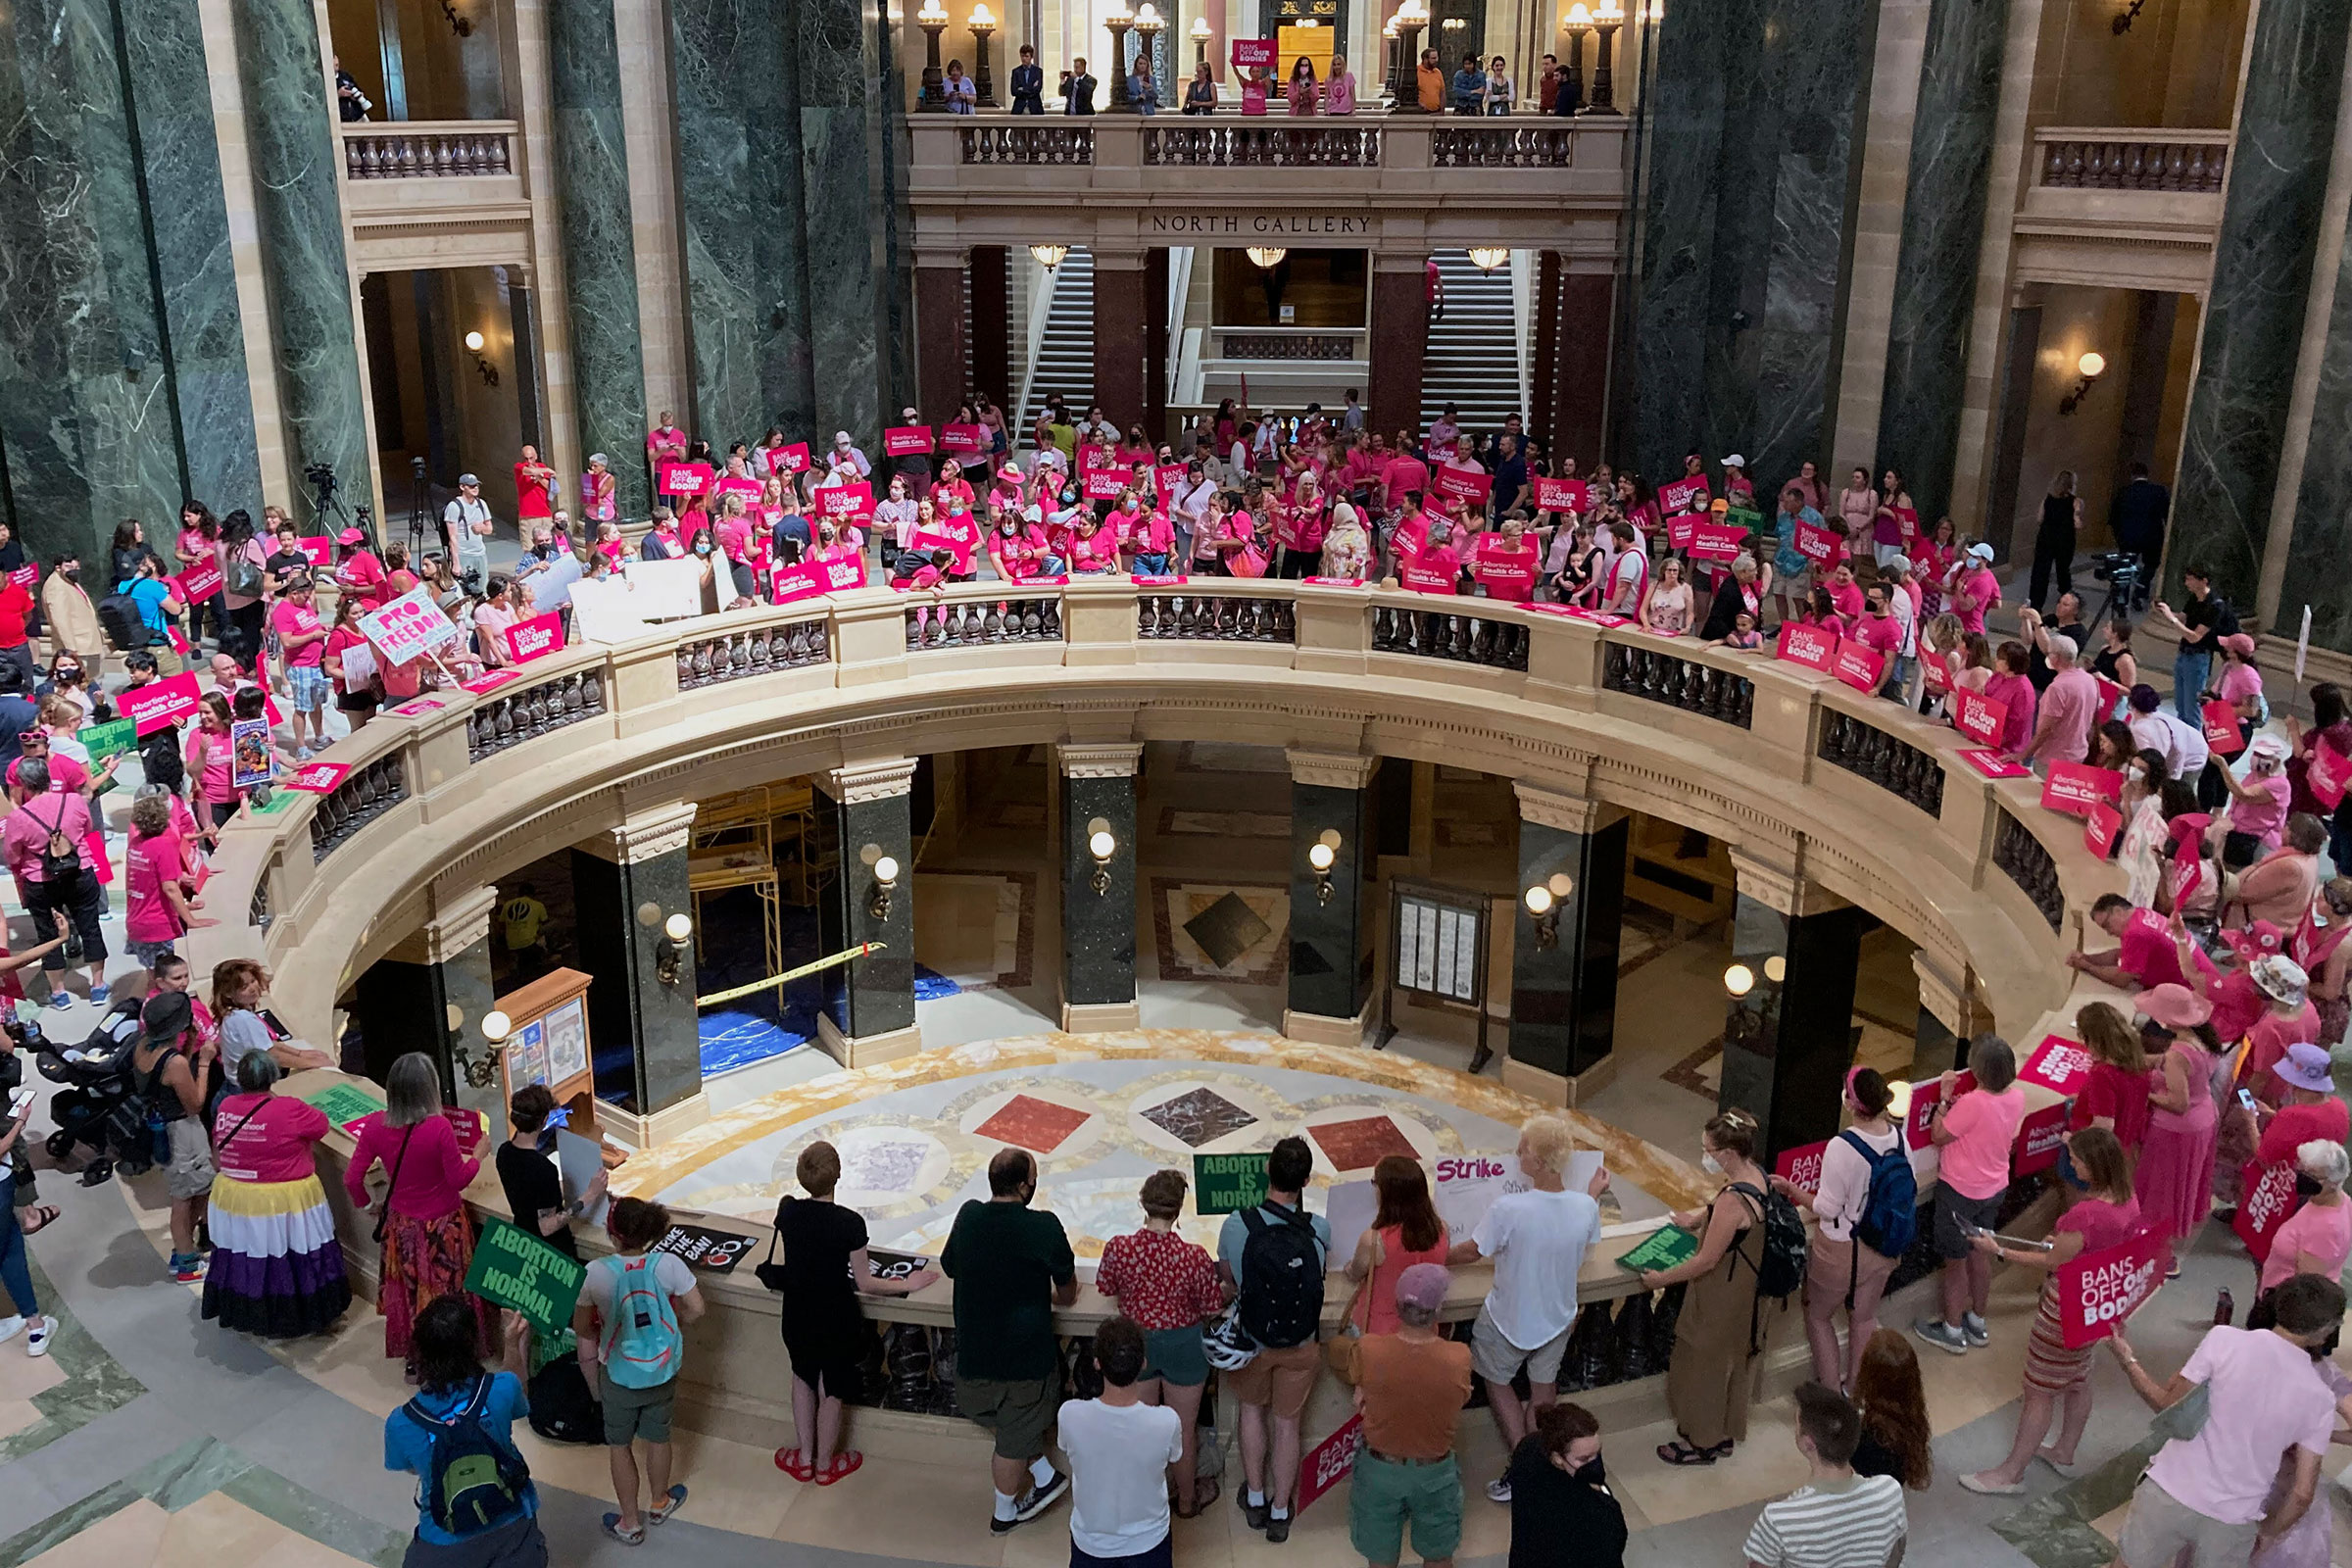 Dozens of protesters gather in the Wisconsin state Capitol rotunda in Madison, Wis., on June 22, 2022, in hopes of convincing Republican lawmakers to repeal the state's 173-year-old ban on abortions. (Todd Richmond—AP)